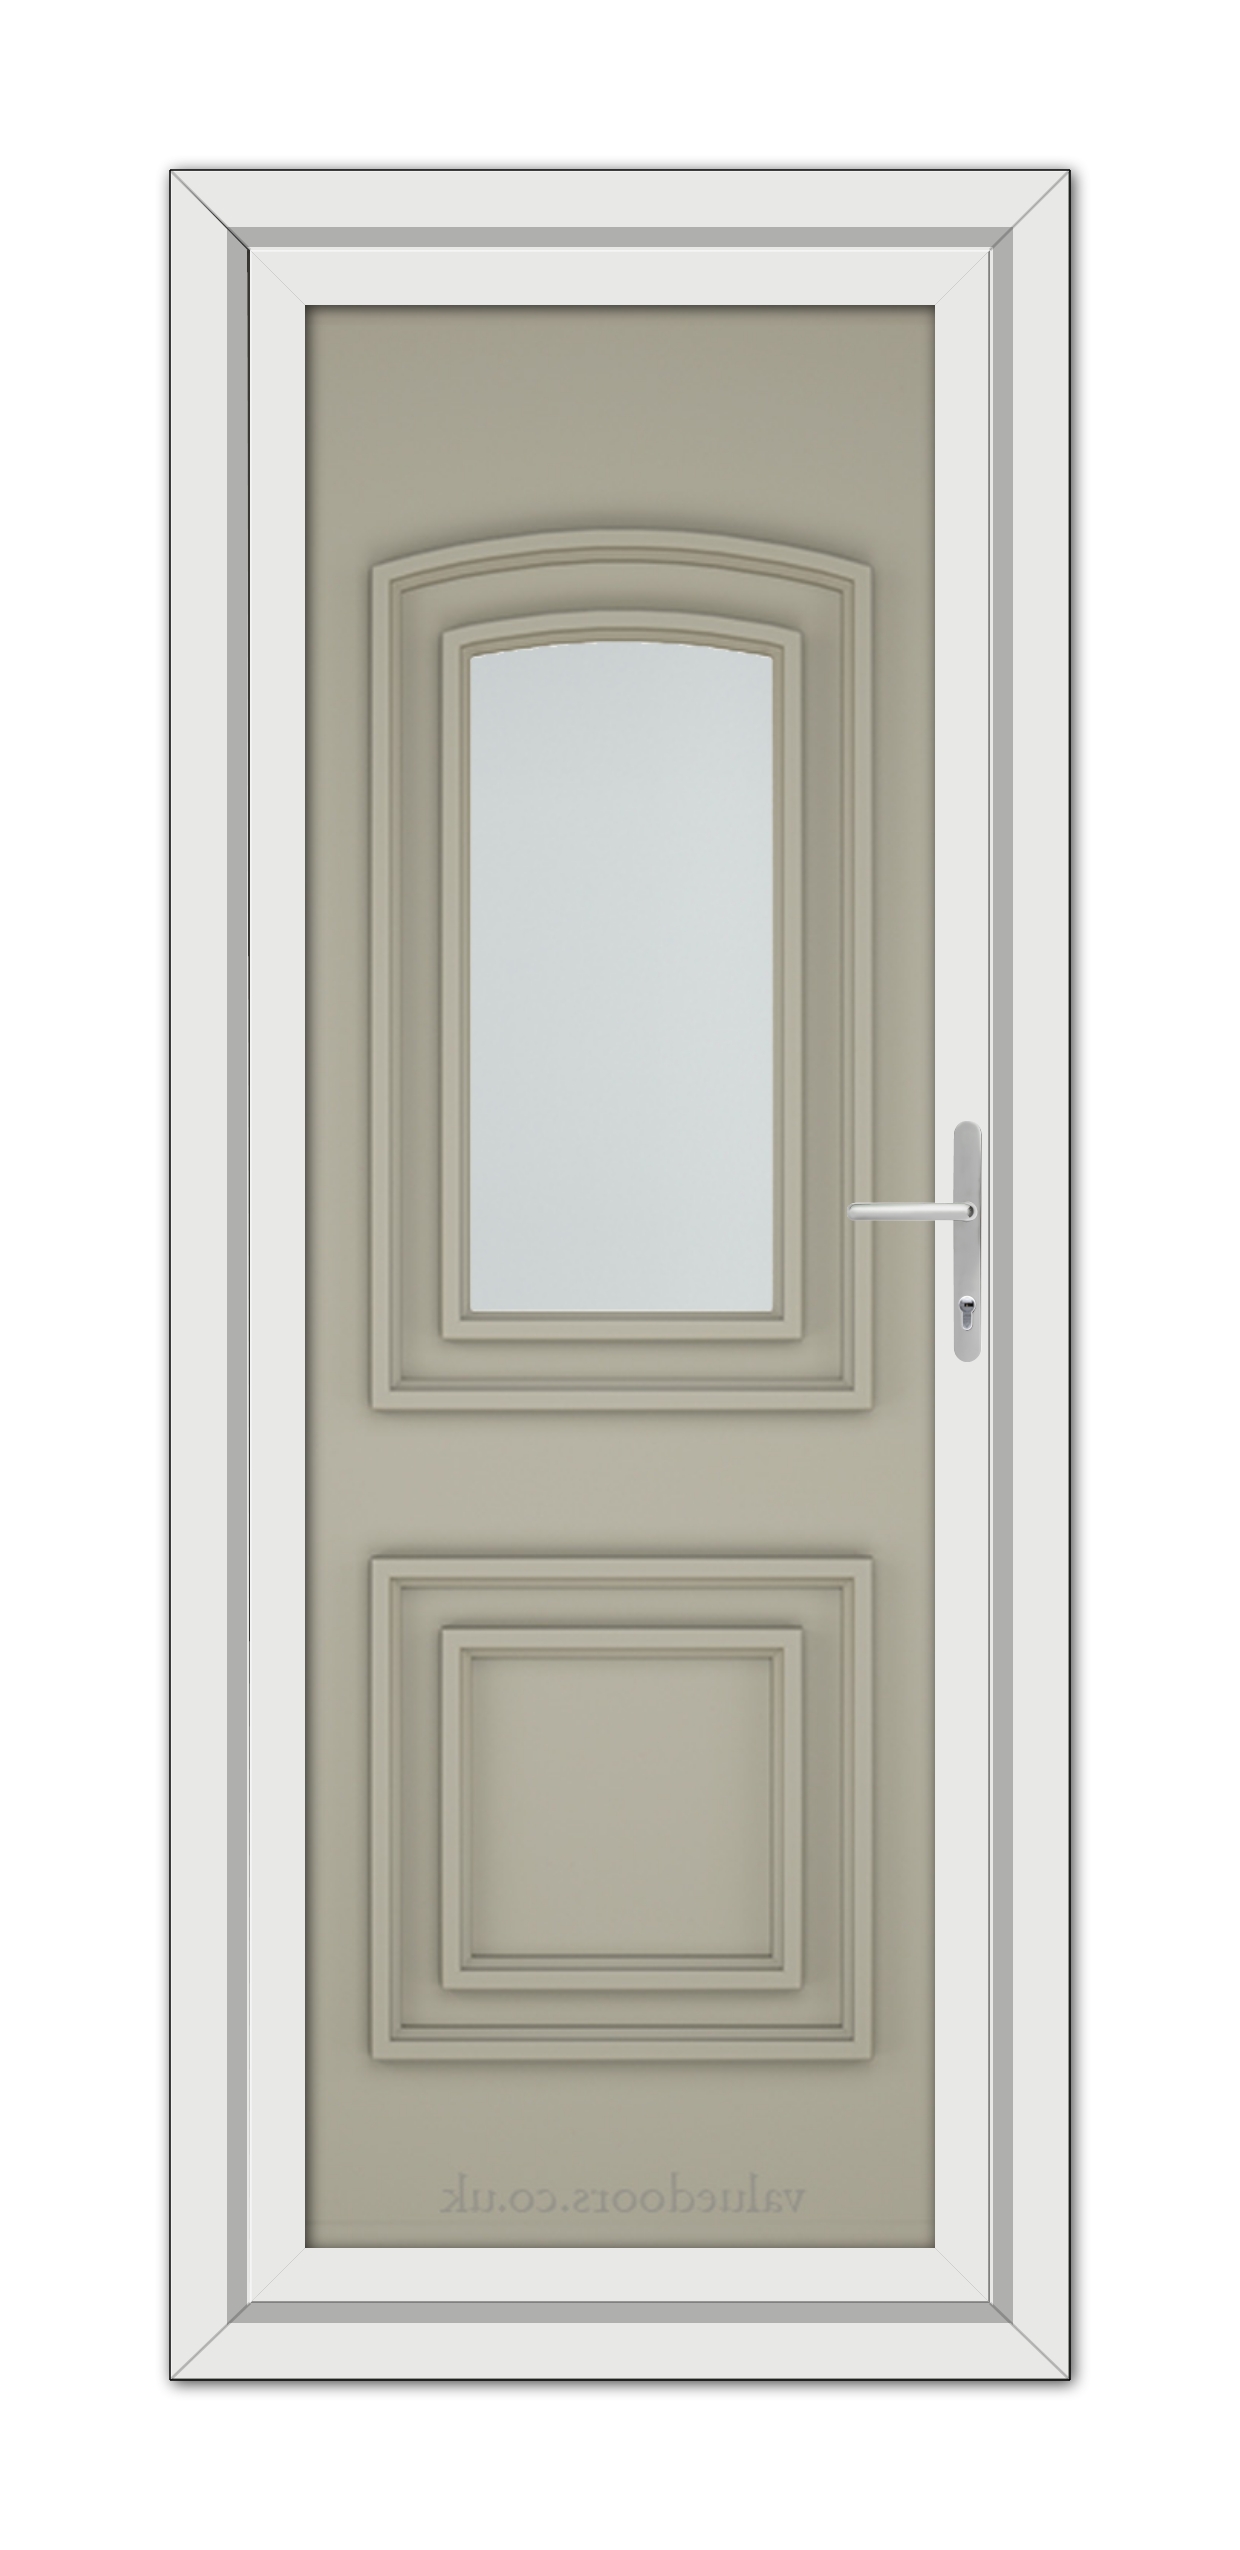 A modern Pebble Grey Balmoral One uPVC door with a vertical glass panel and a silver handle, designed for interior use.